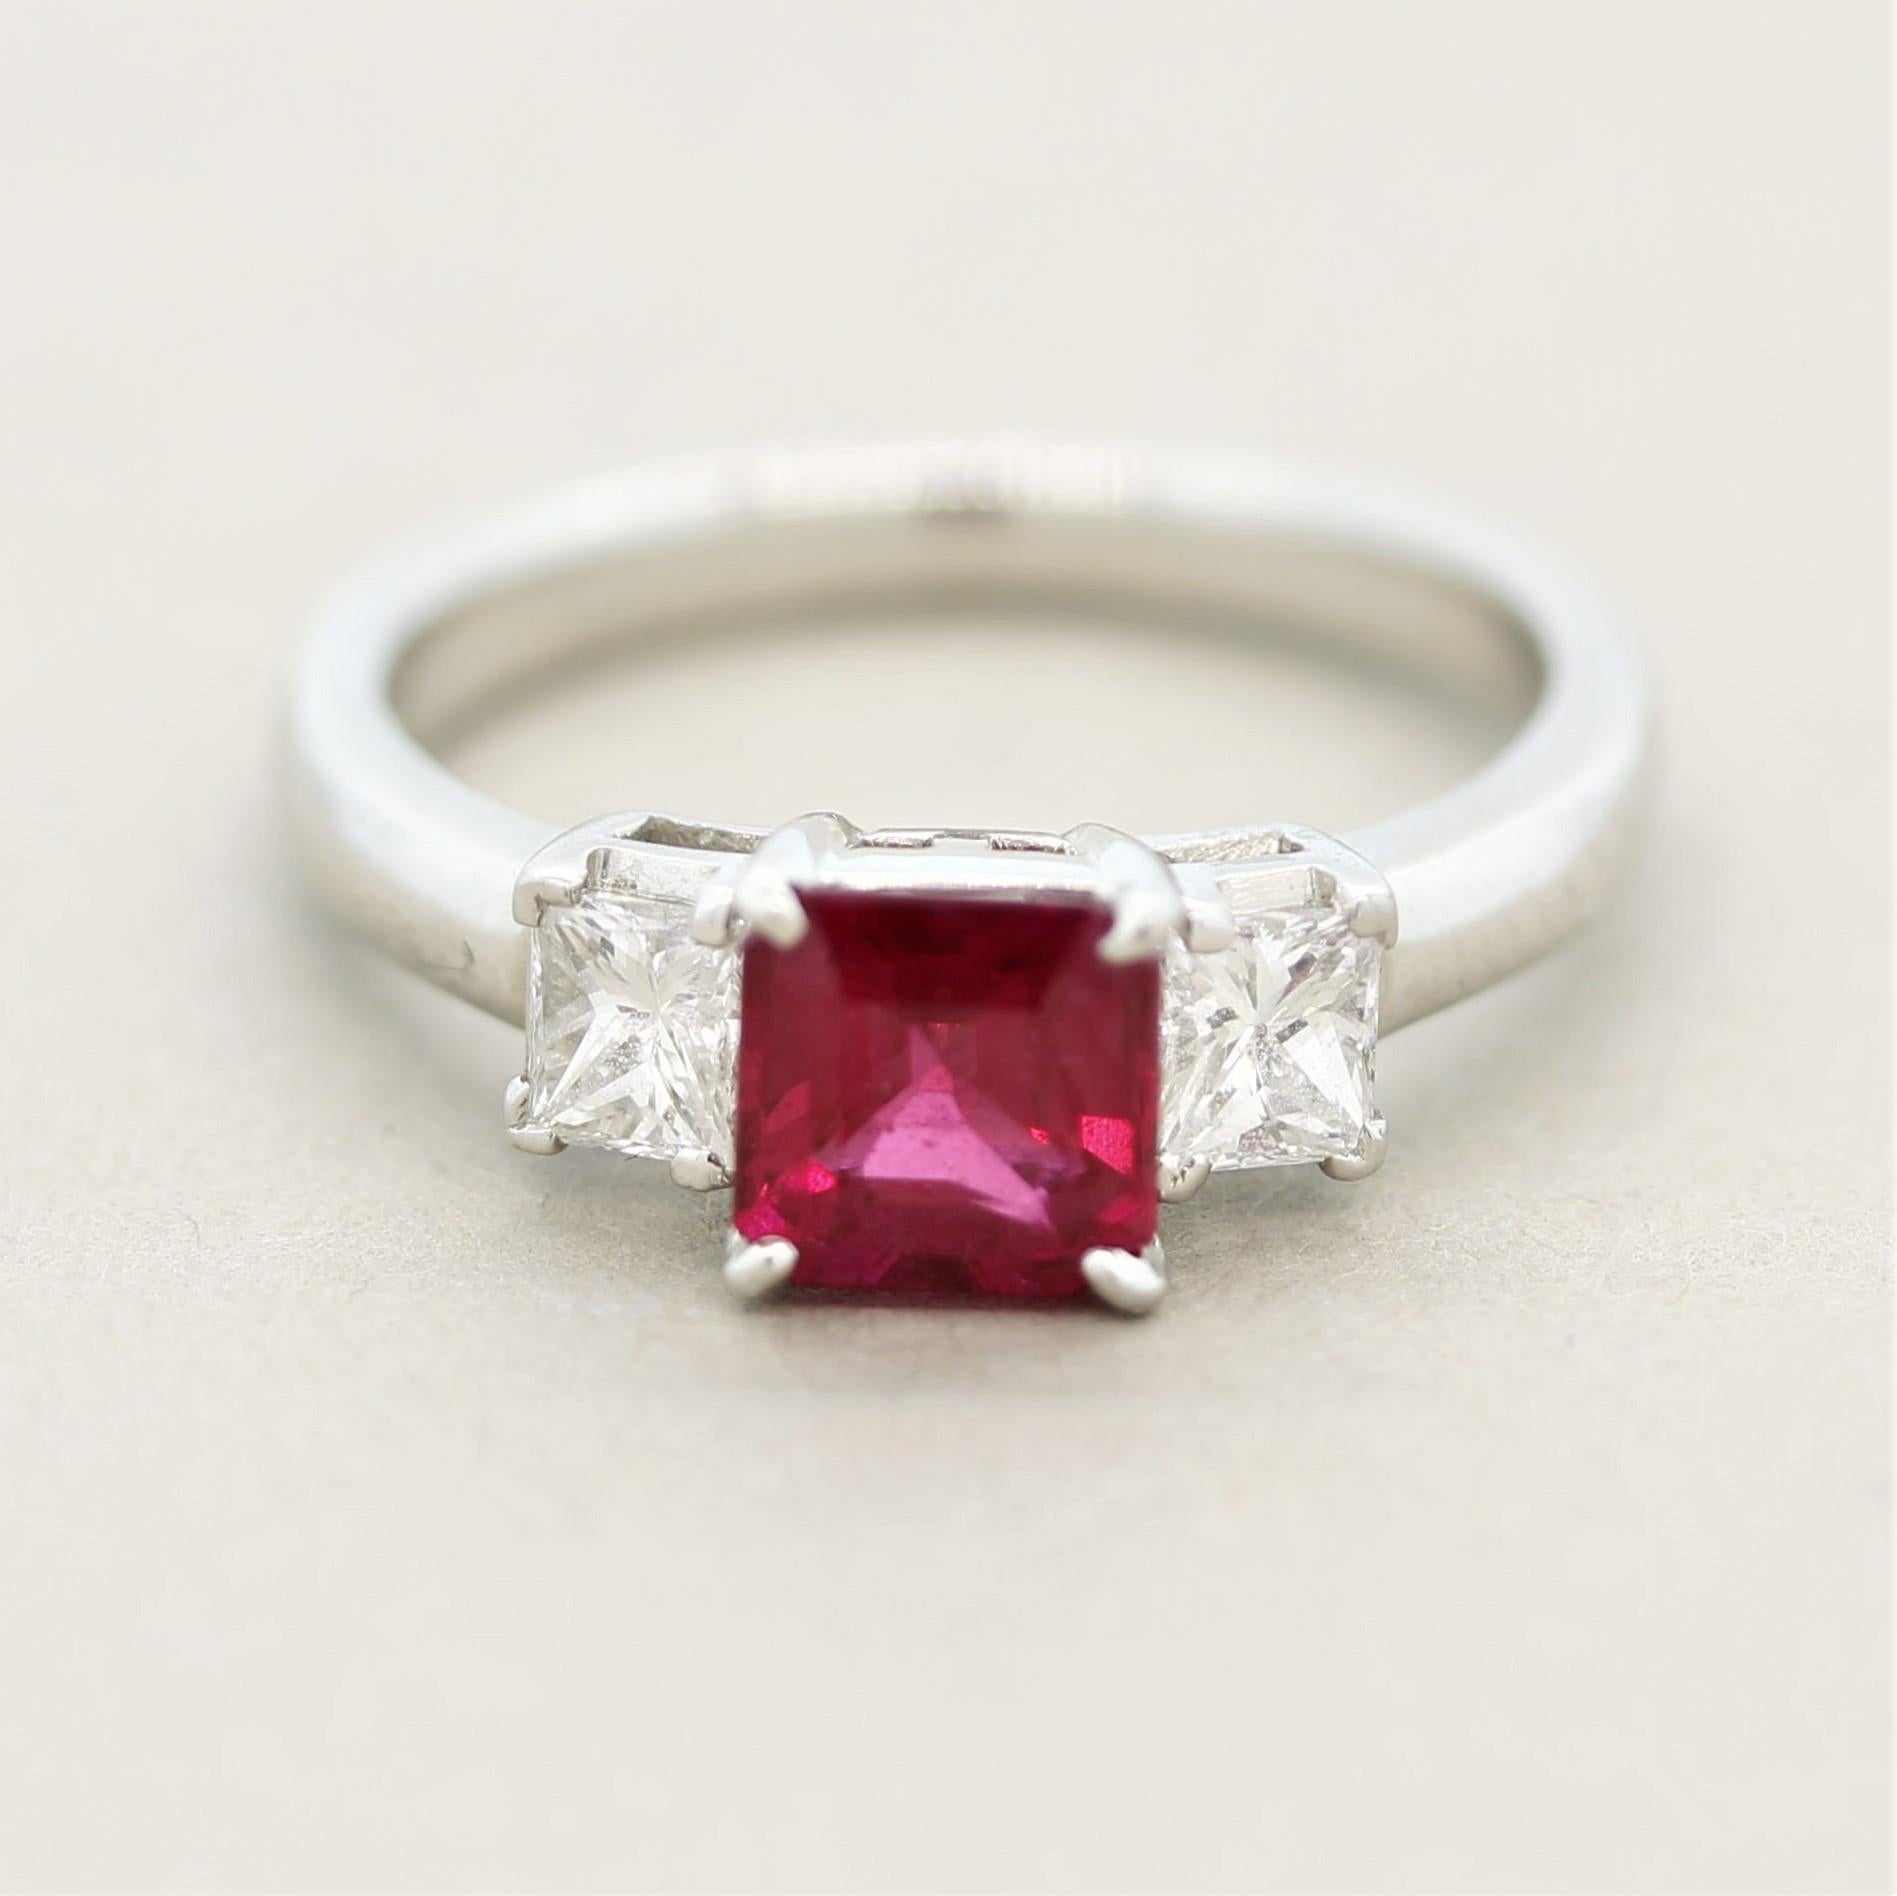 A classic 3-stone design featuring a 0.98 carat square shaped ruby. It has a bright fine vivid red color and is free of any eye-visible inclusions allowing the stones natural brilliance to shine. It is accented by two princess-cut diamonds set on